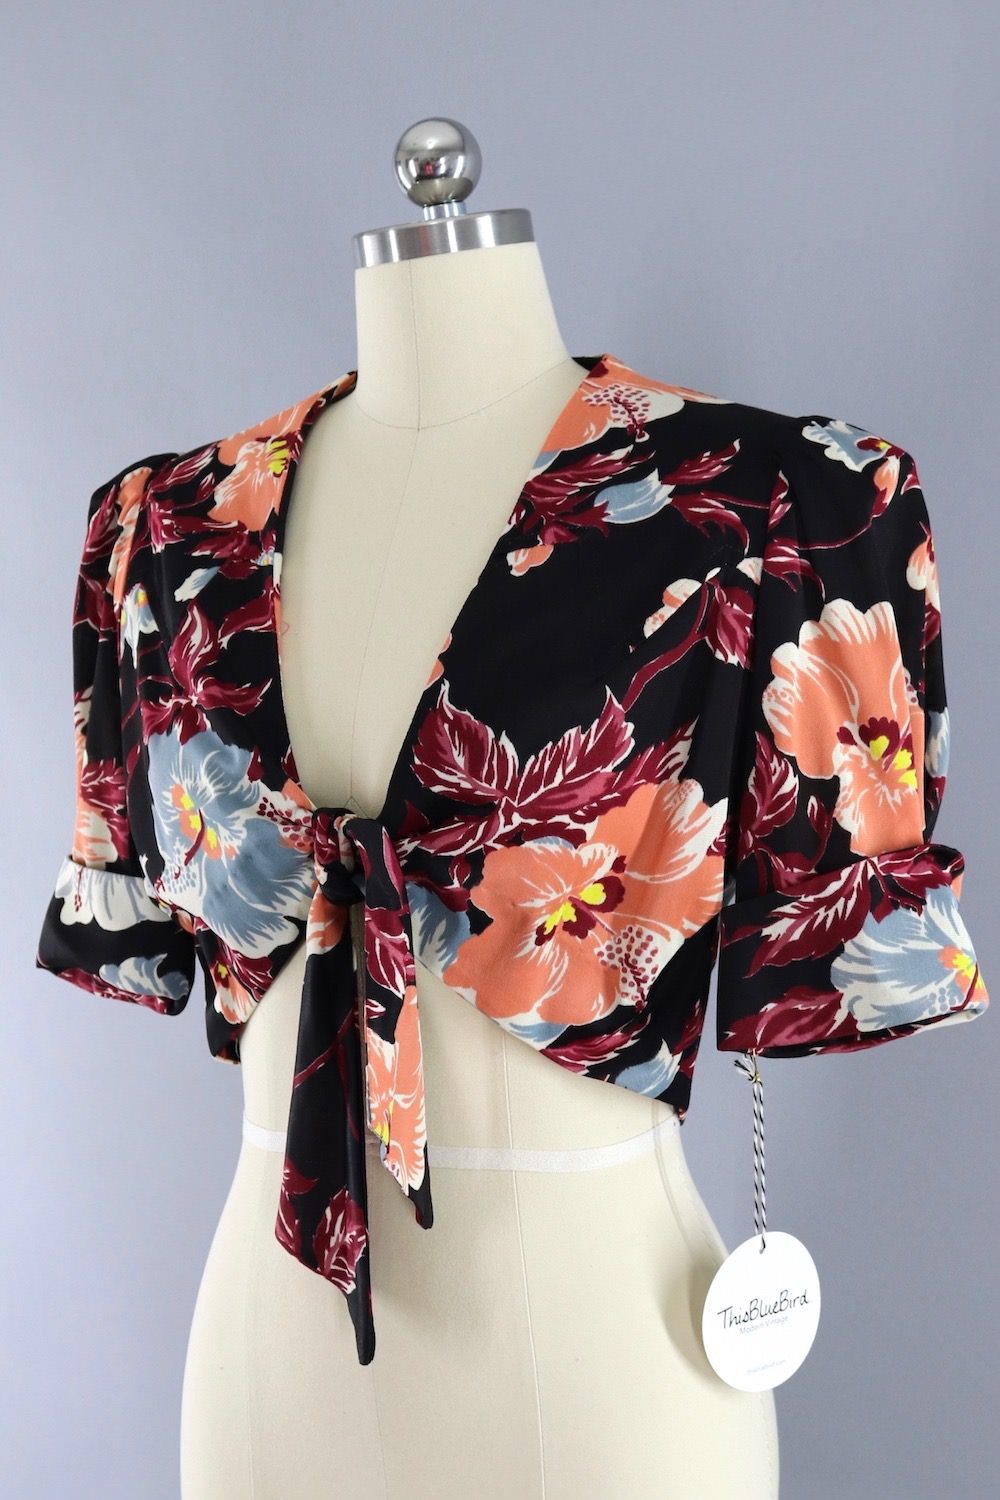 Vintage Cropped Blouse / Black Floral Print - ThisBlueBird